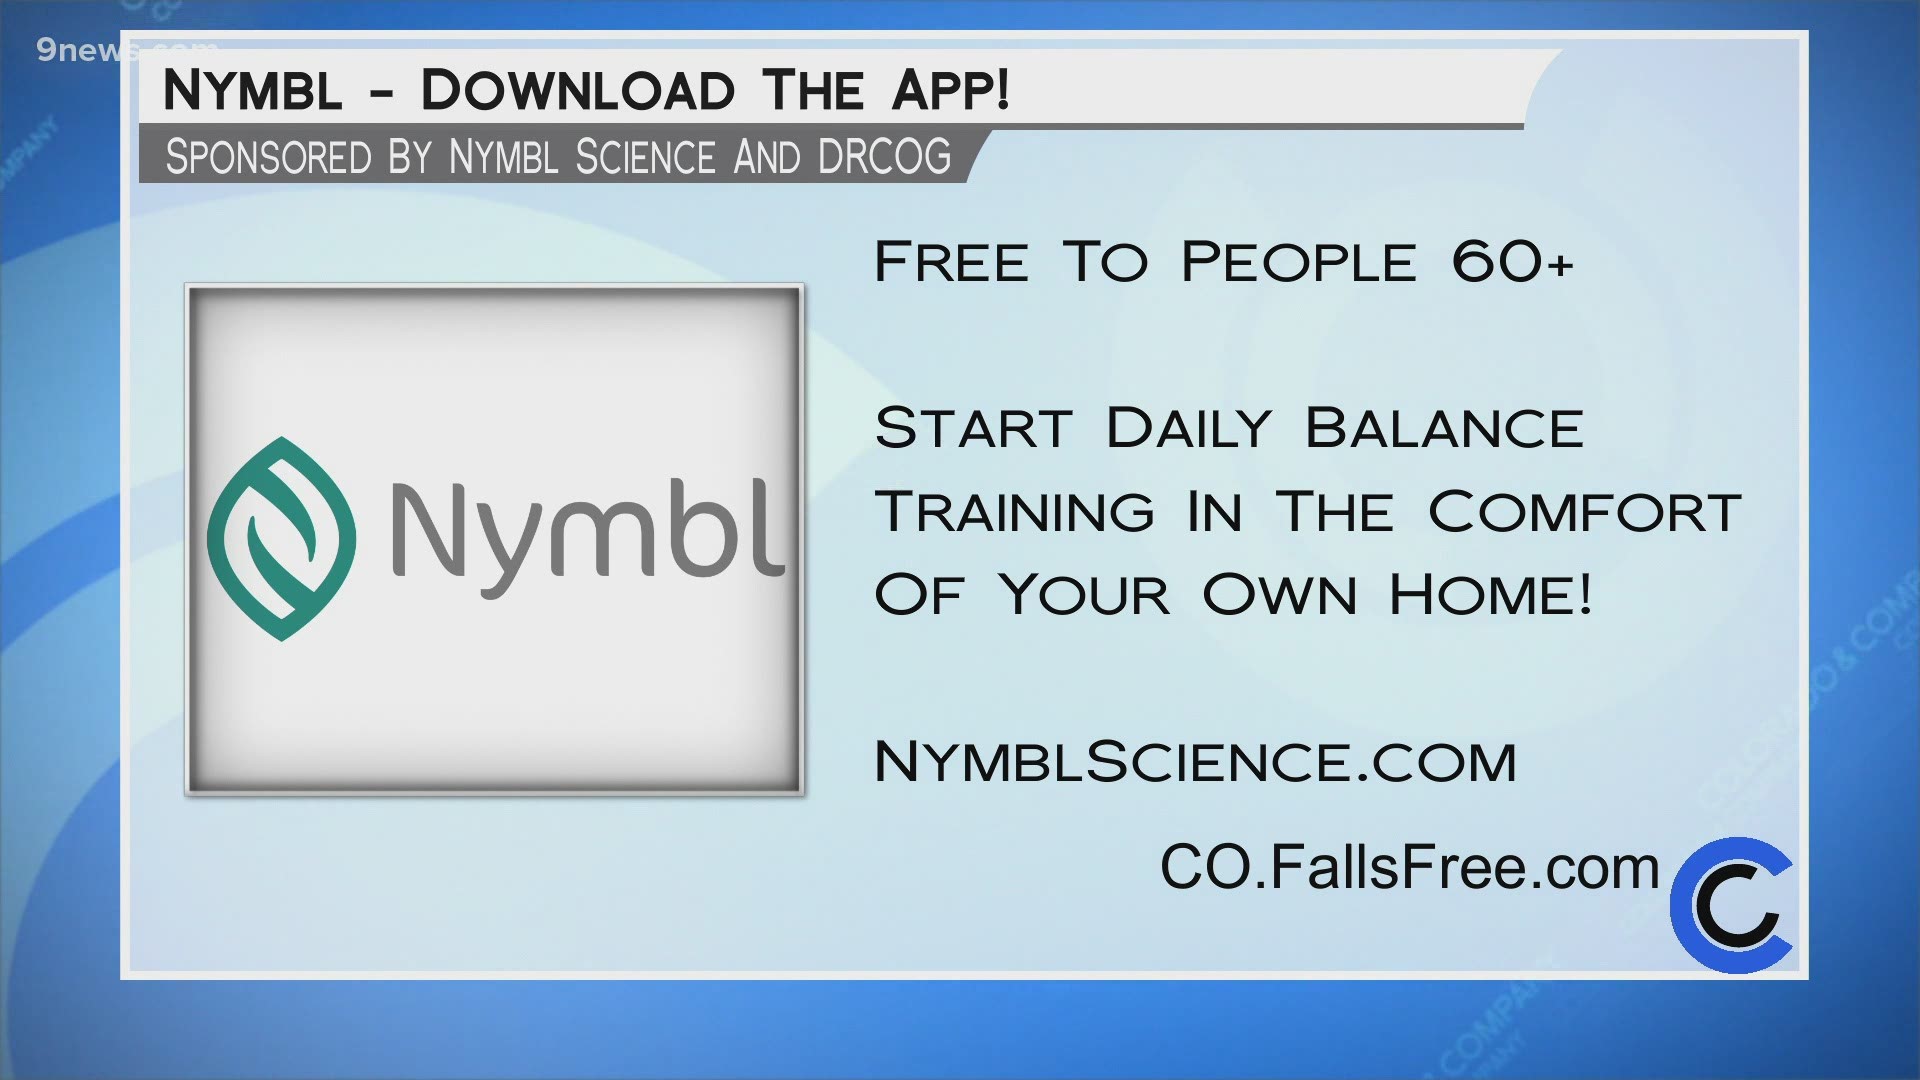 Nymbl is free for all Coloradans 60 and up. Visit CO.FallsFree.com to learn more about improving your balance.